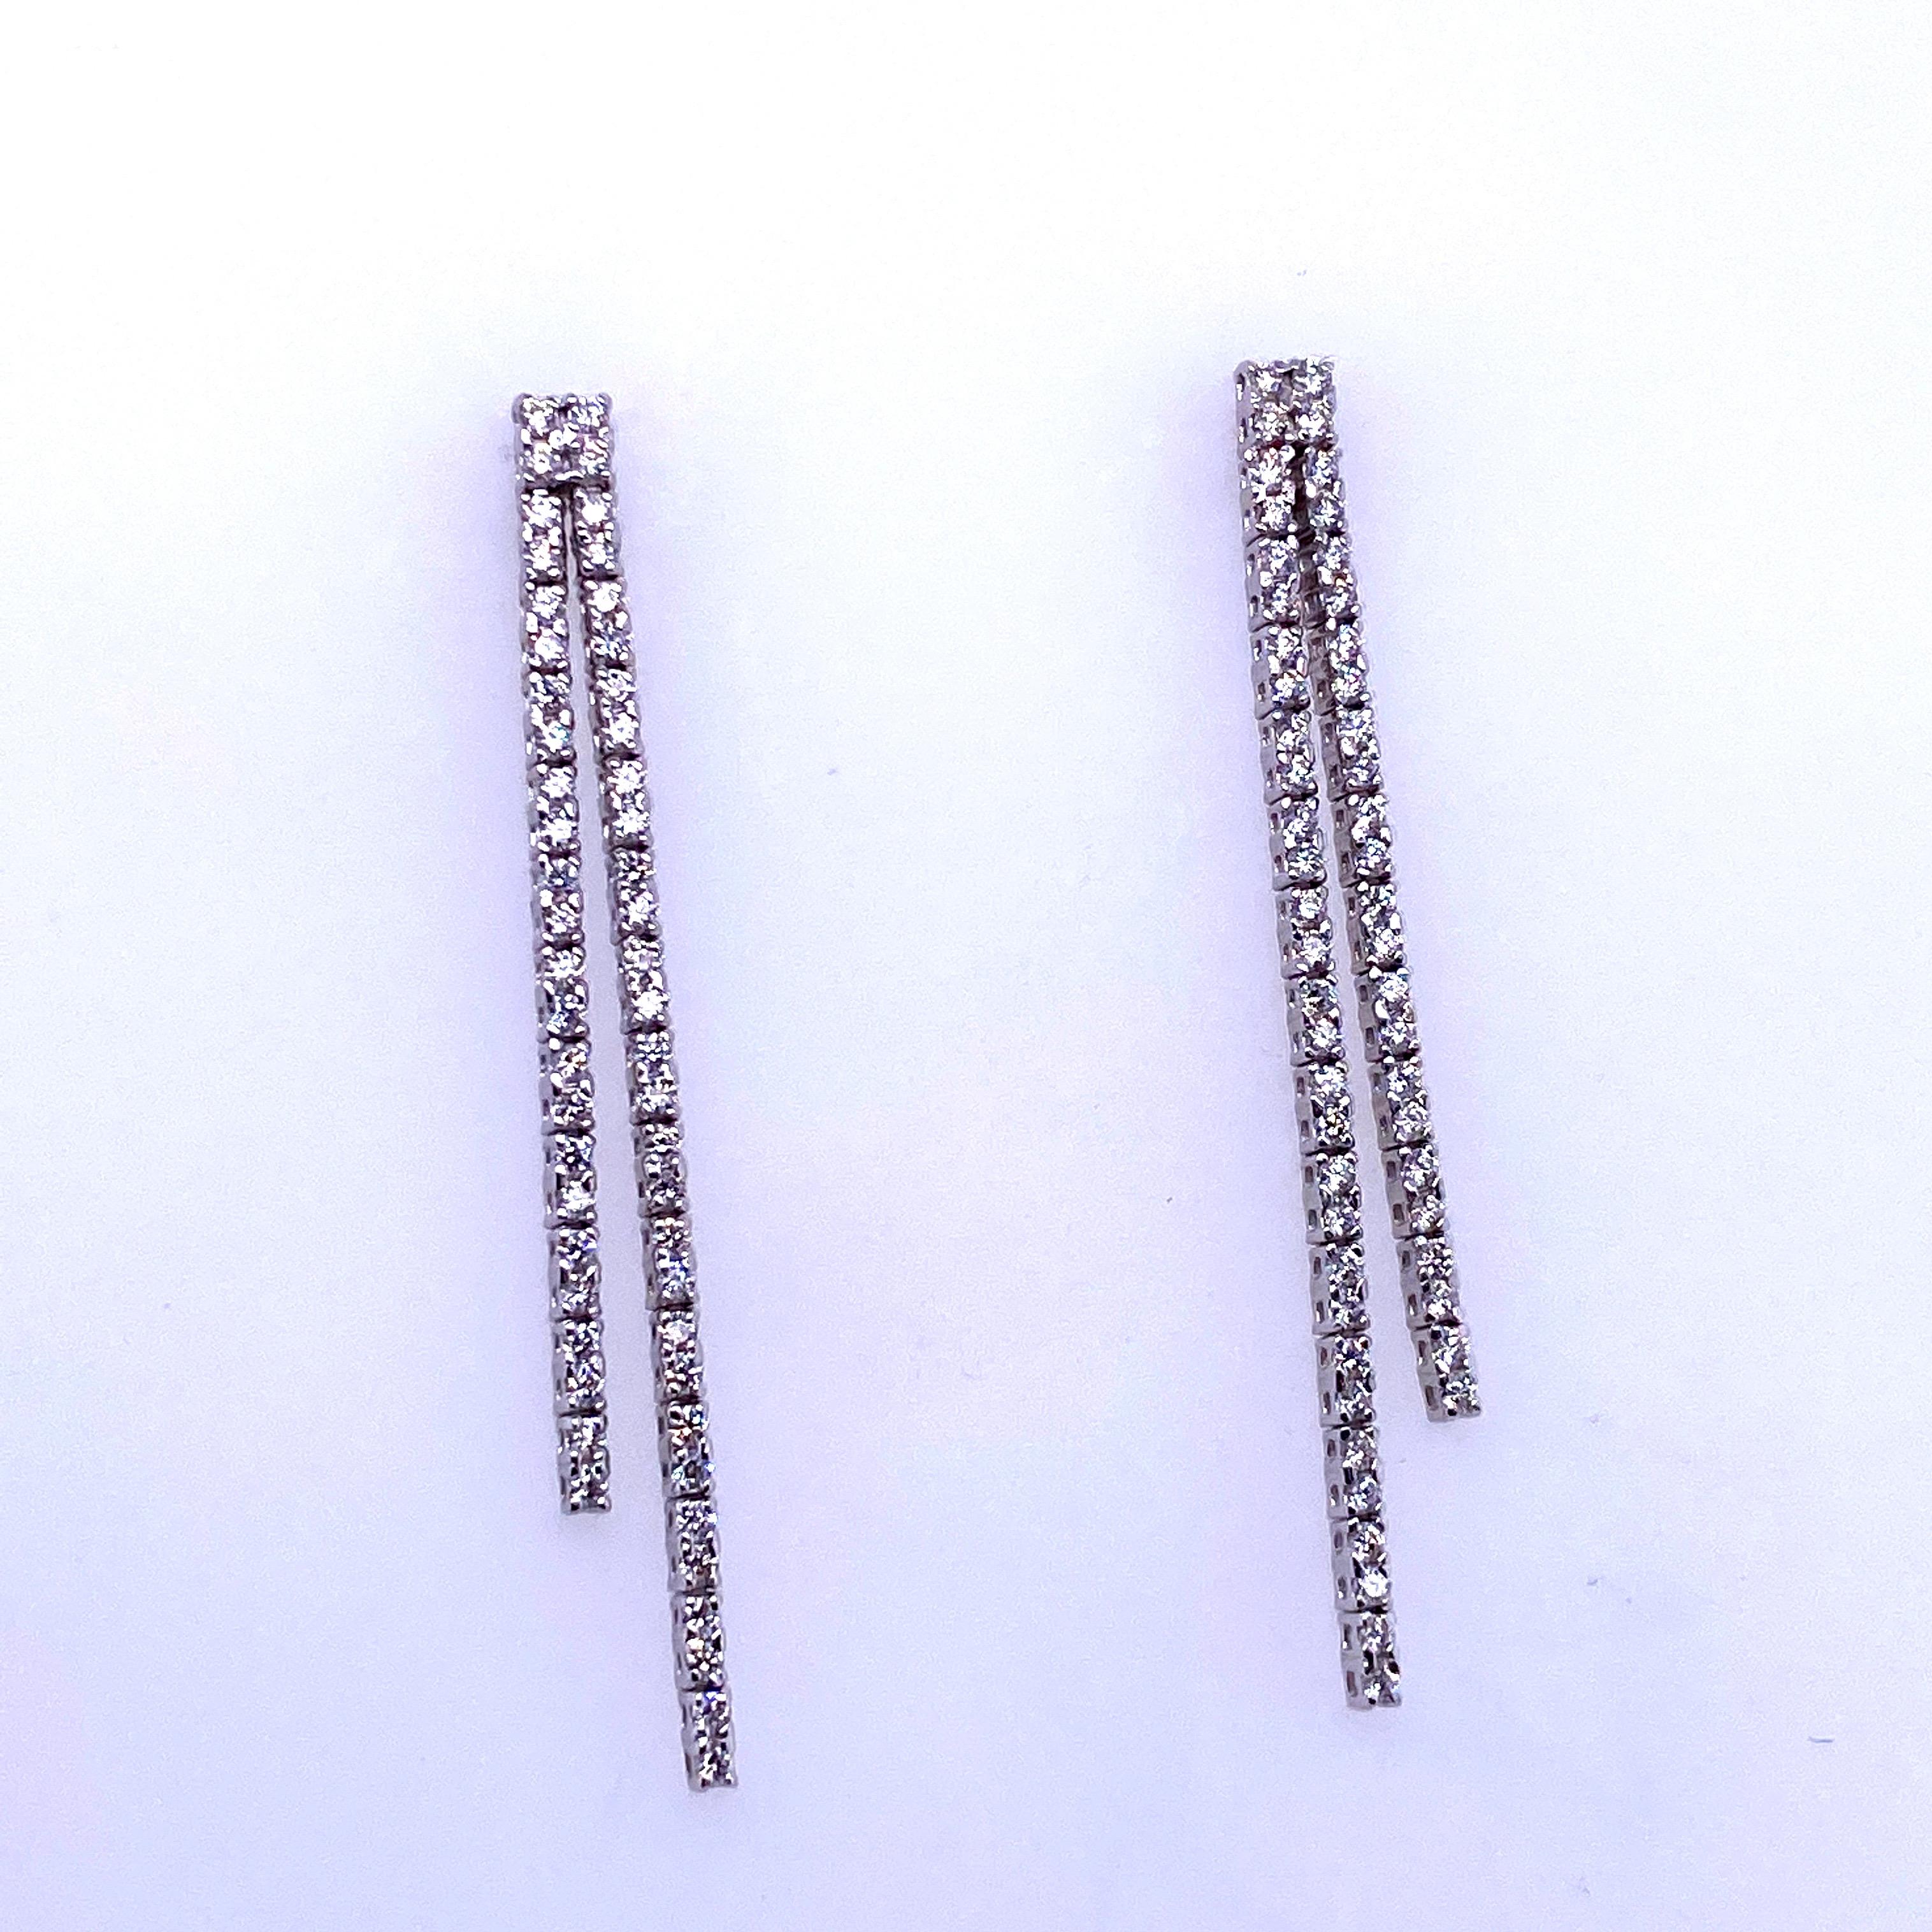 14K White gold drop earrings featuring two diamond rows containing 108 round brilliants weighing 0.90 carats. 
Color G
Clarity SI2

Available in yellow gold. 